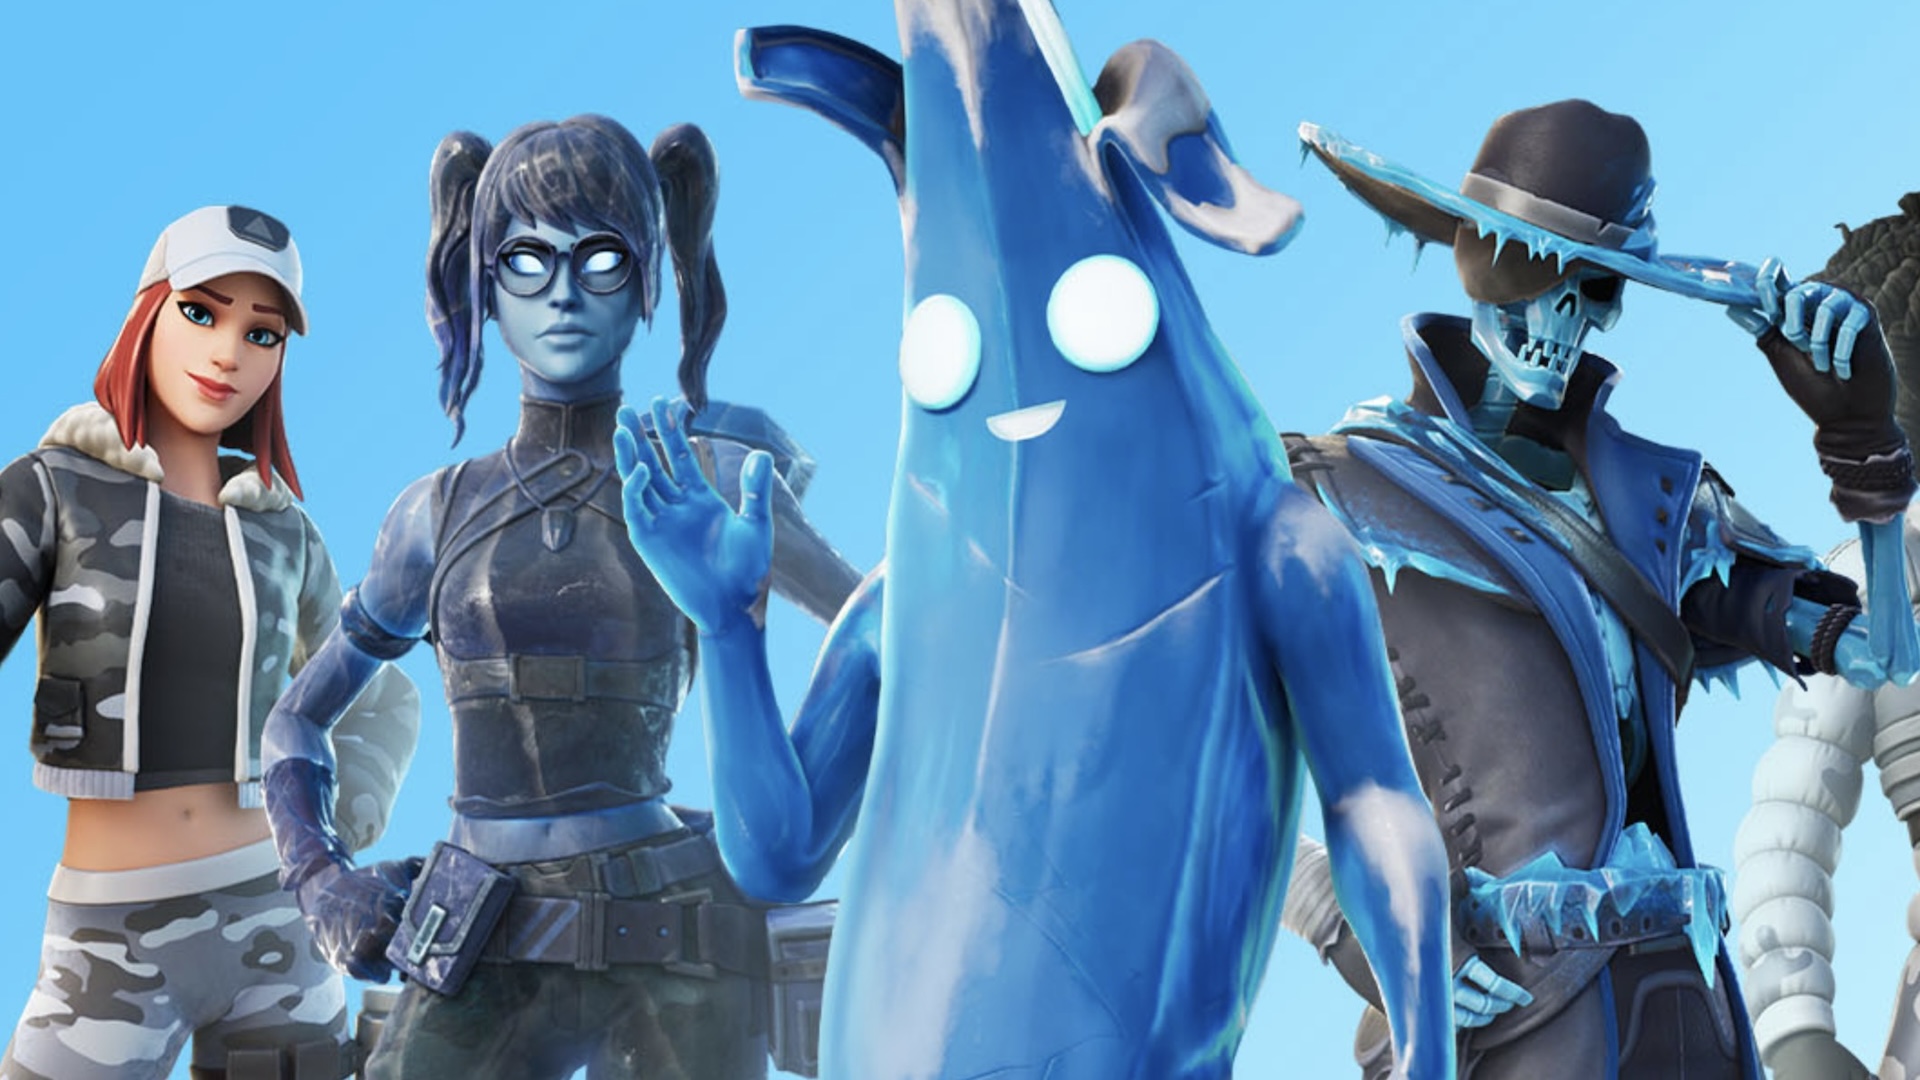 Fortnite OG’s week 4 update adds Jetpacks and a much-loved vehicle